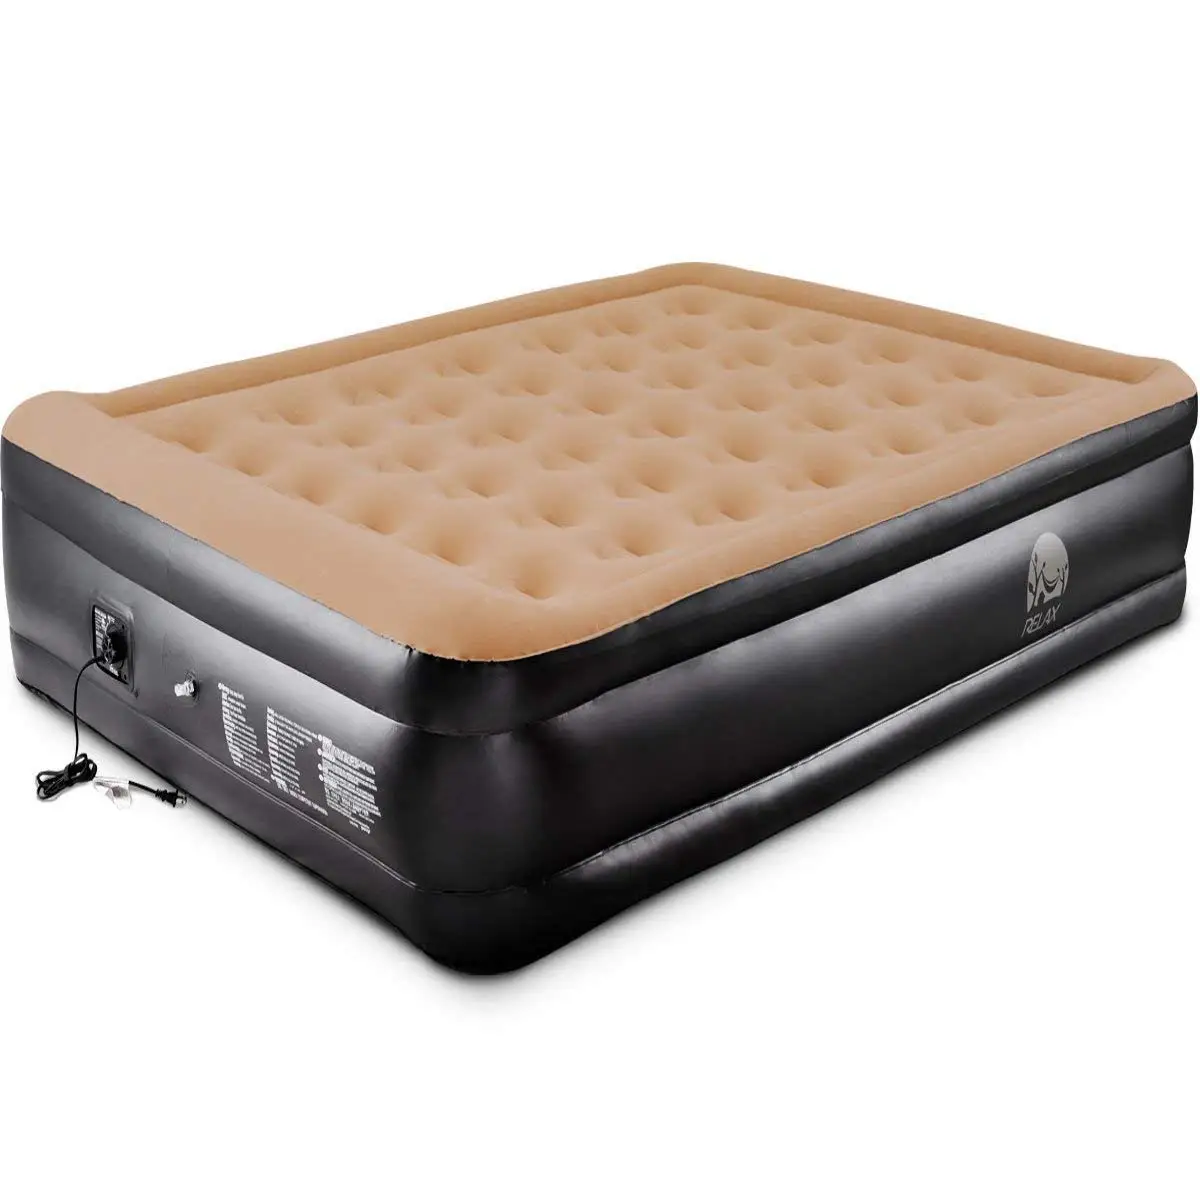 Raised Queen Size Air Bed матрас